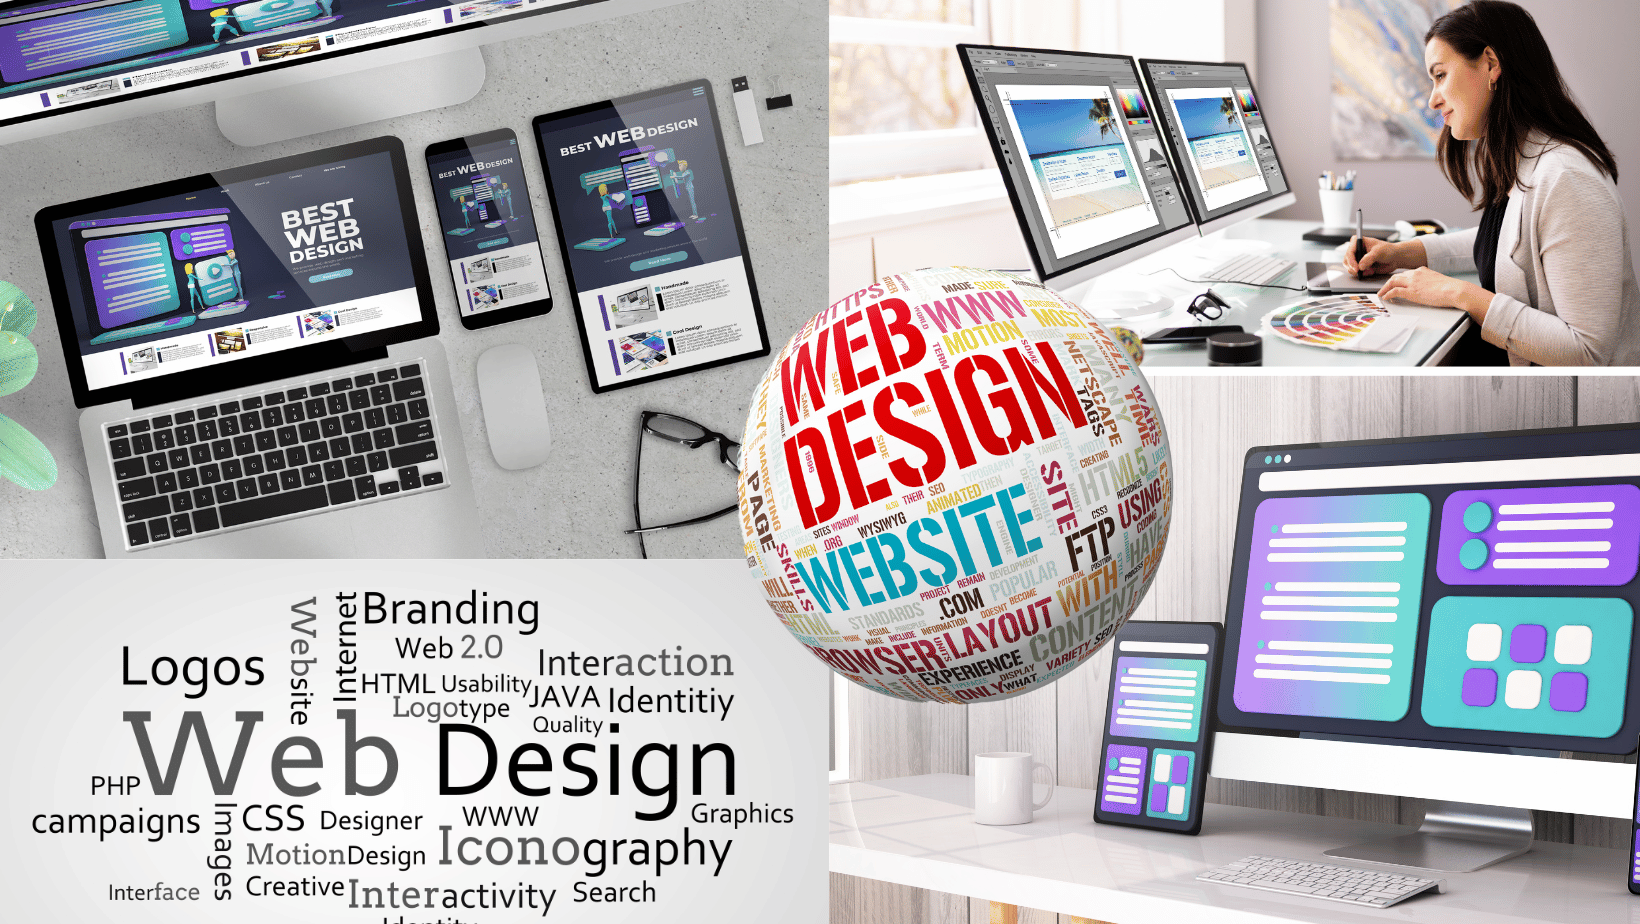 Collage of sharp web design visuals showcasing Ascend Adwerks' Quick Wins services for rapid, high-quality website creation and optimization.